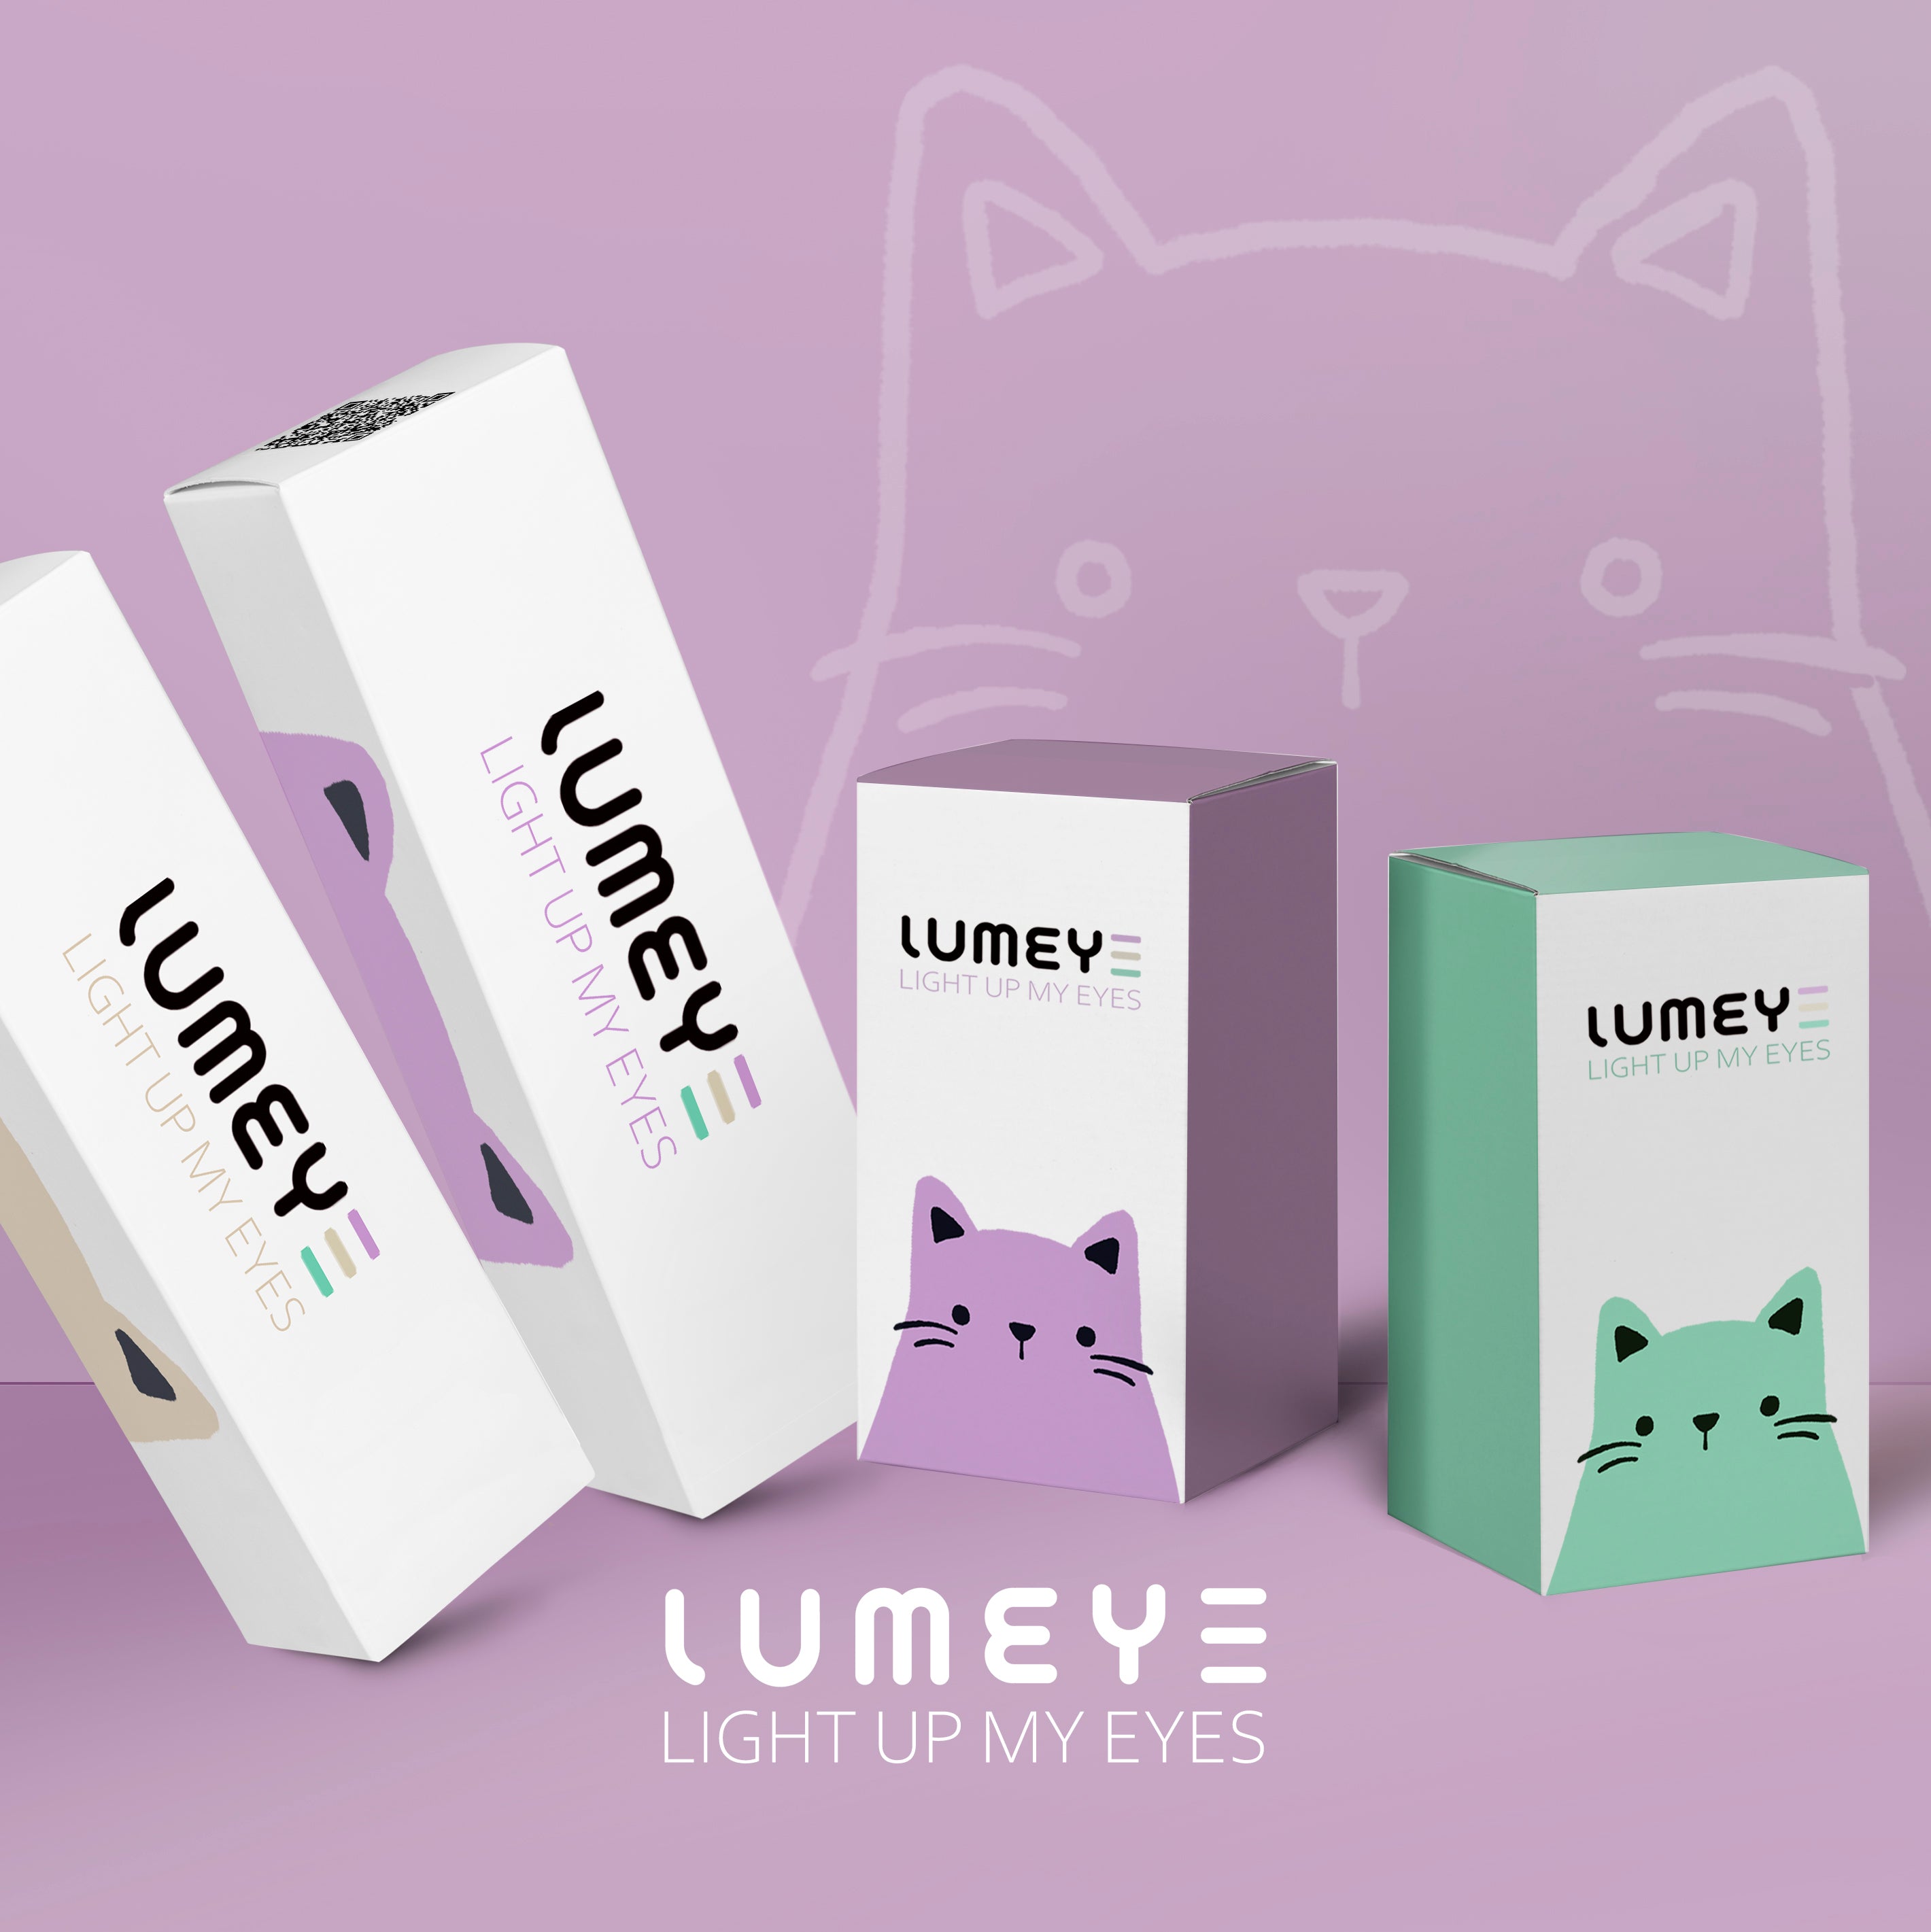 Best COLORED CONTACTS - LUMEYE Magical Black Colored Contact Lenses - LUMEYE